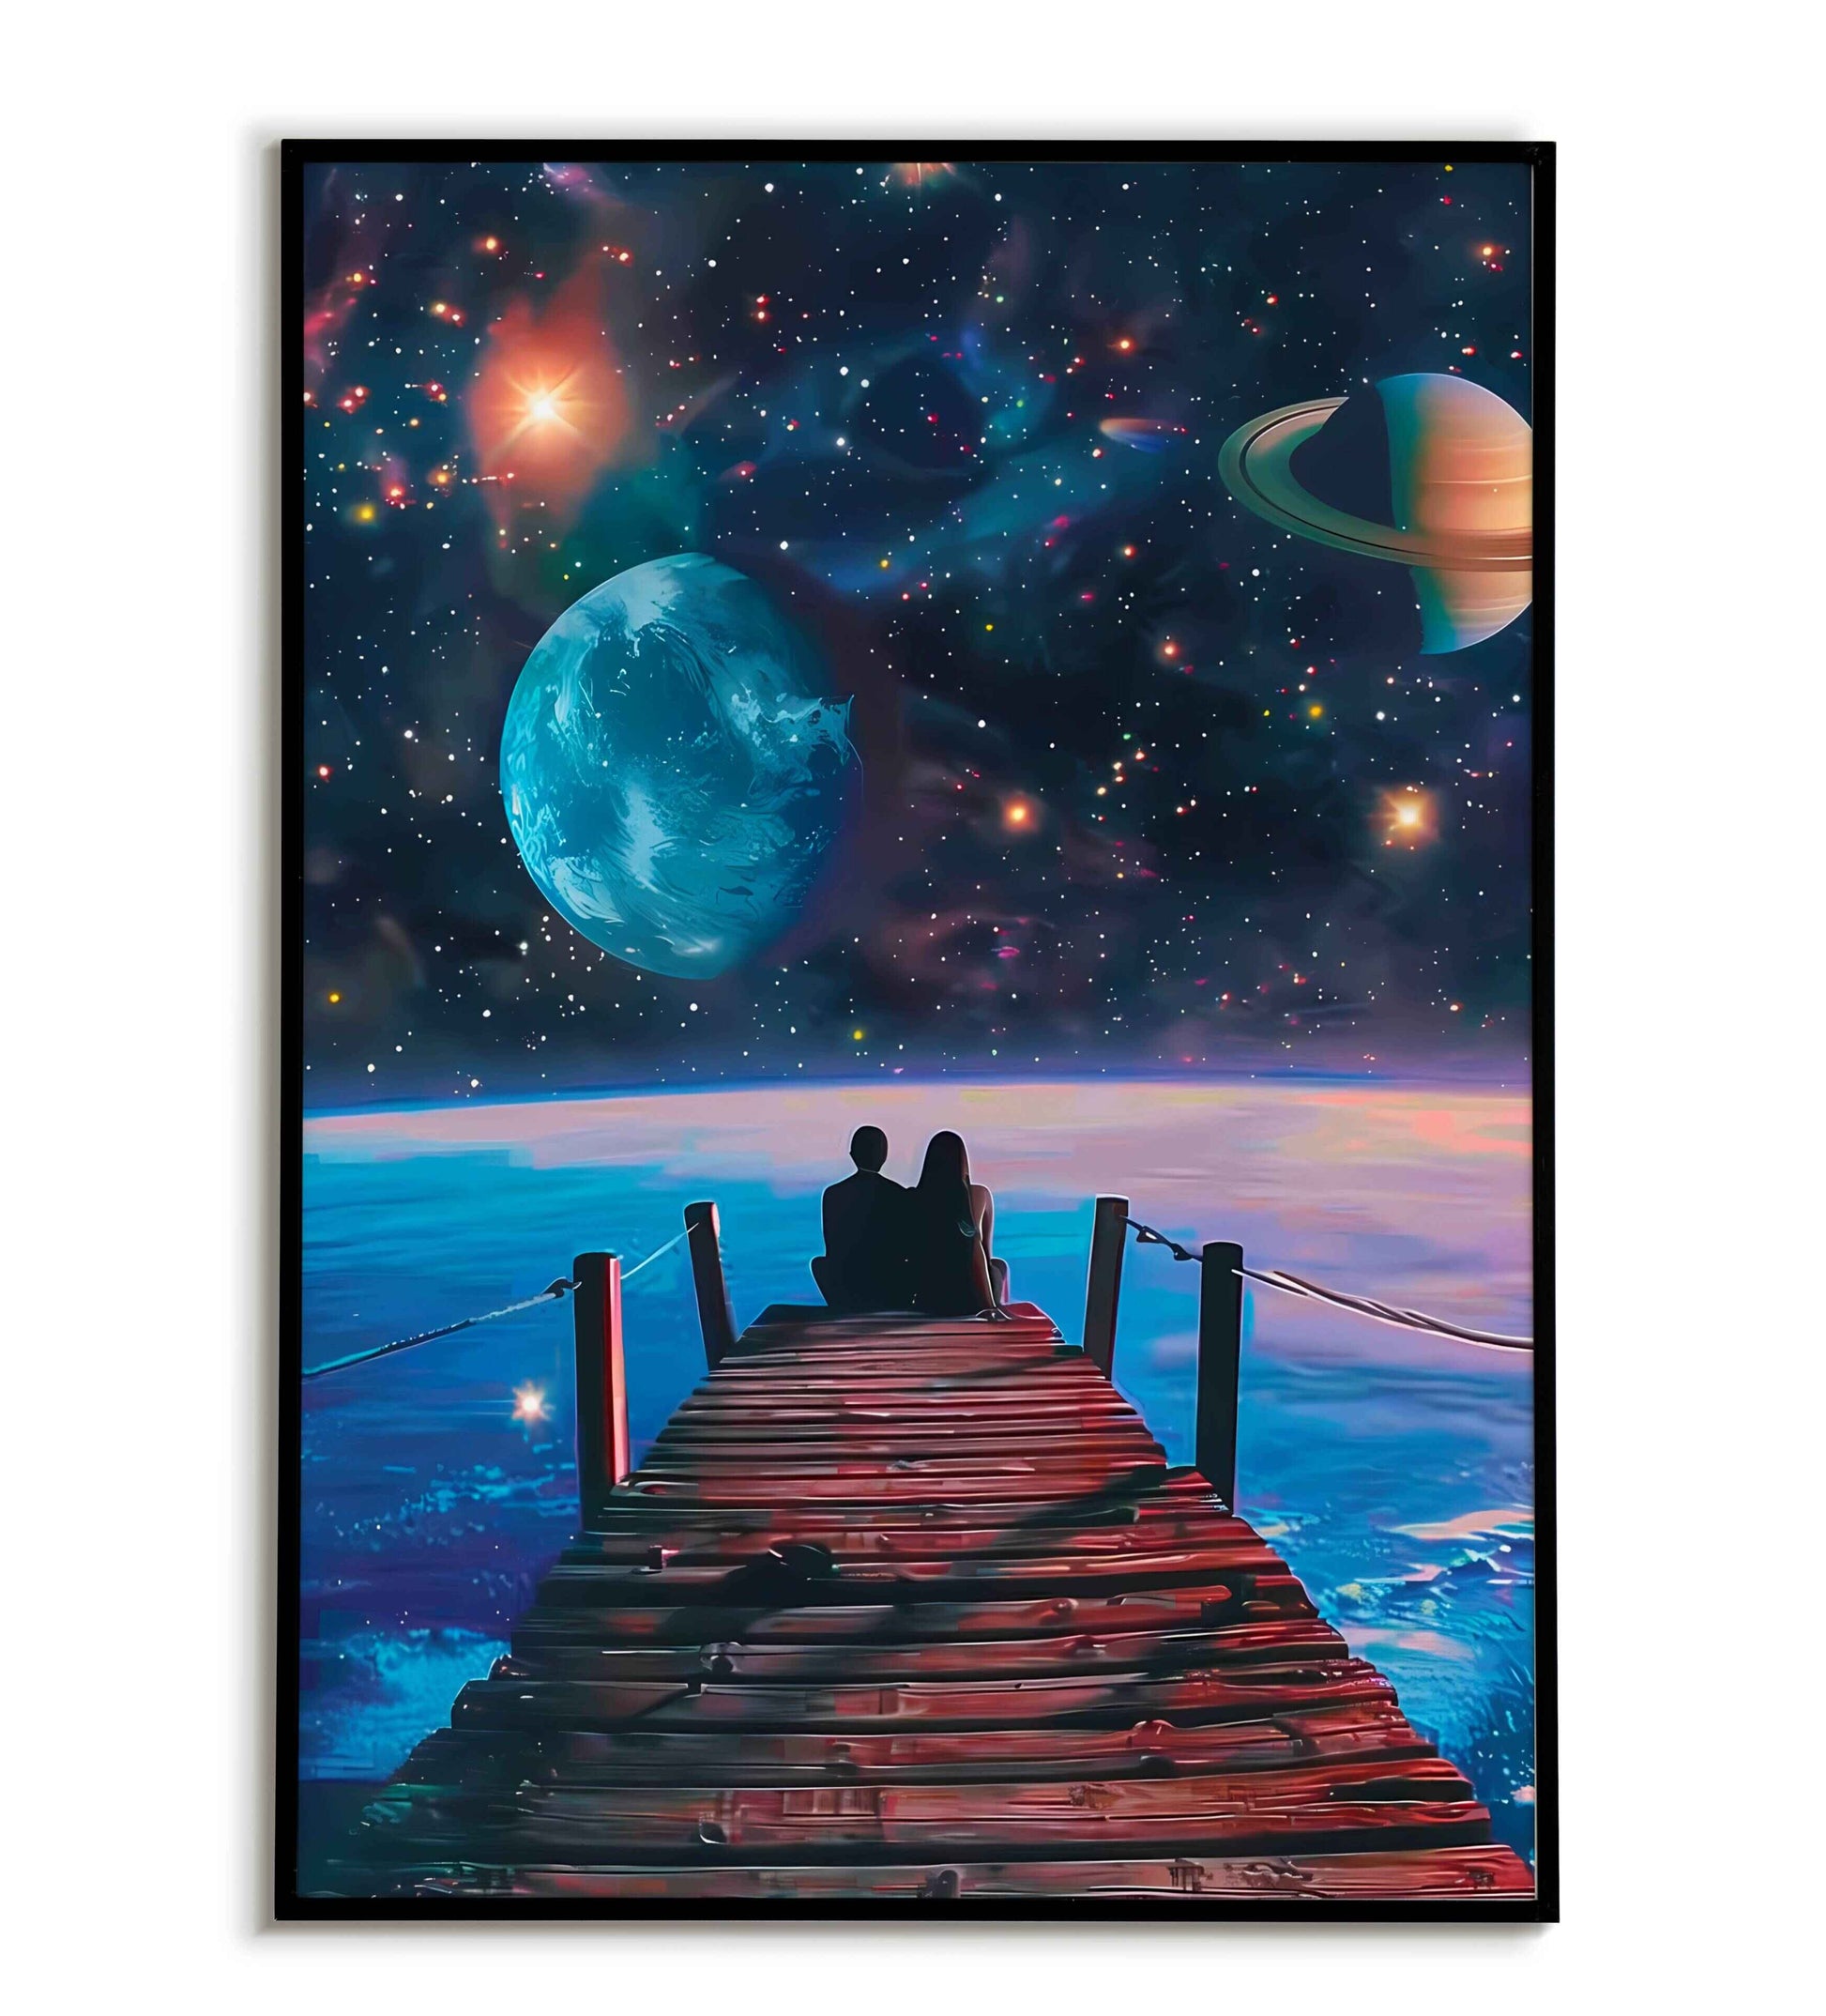 Space Date printable poster. Available for purchase as a physical poster or digital download.